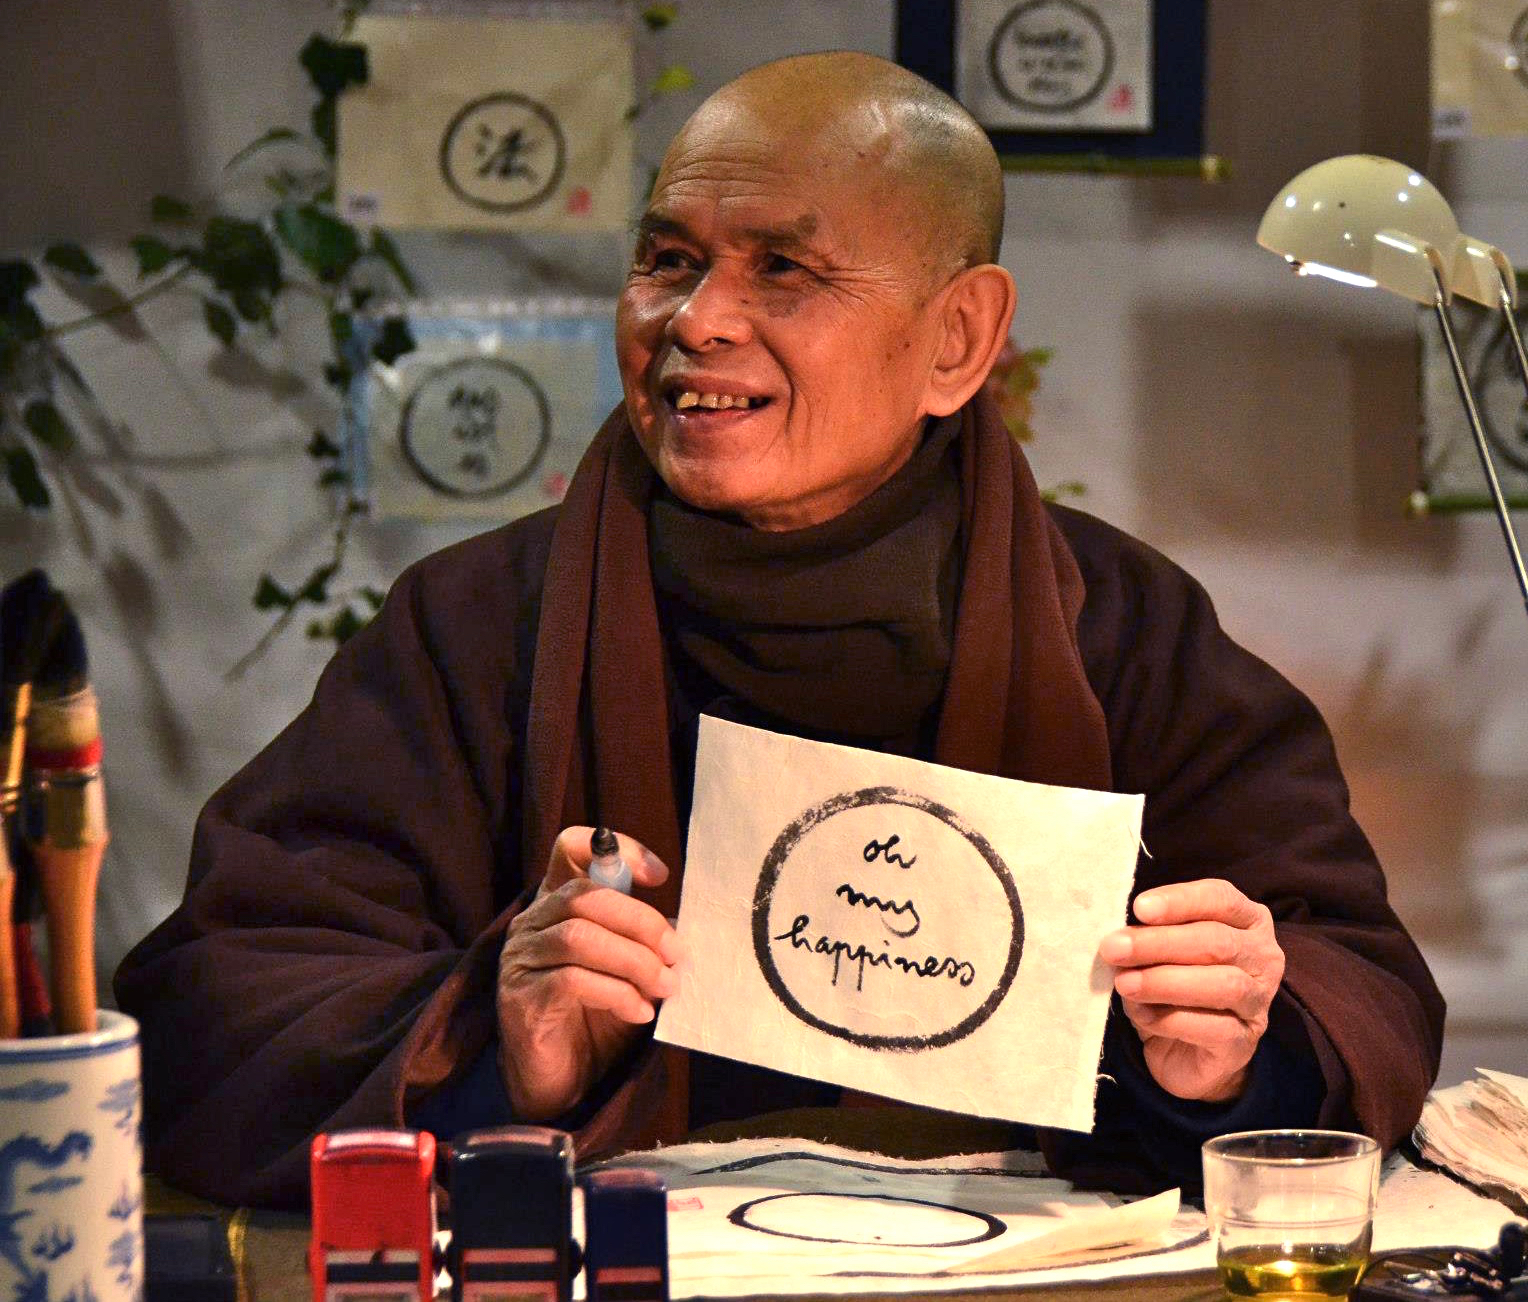 Zen Master Thich Nhat Hanh writes calligraphies at the Plum Village in France in 2013. Photo courtesy of Plum Village